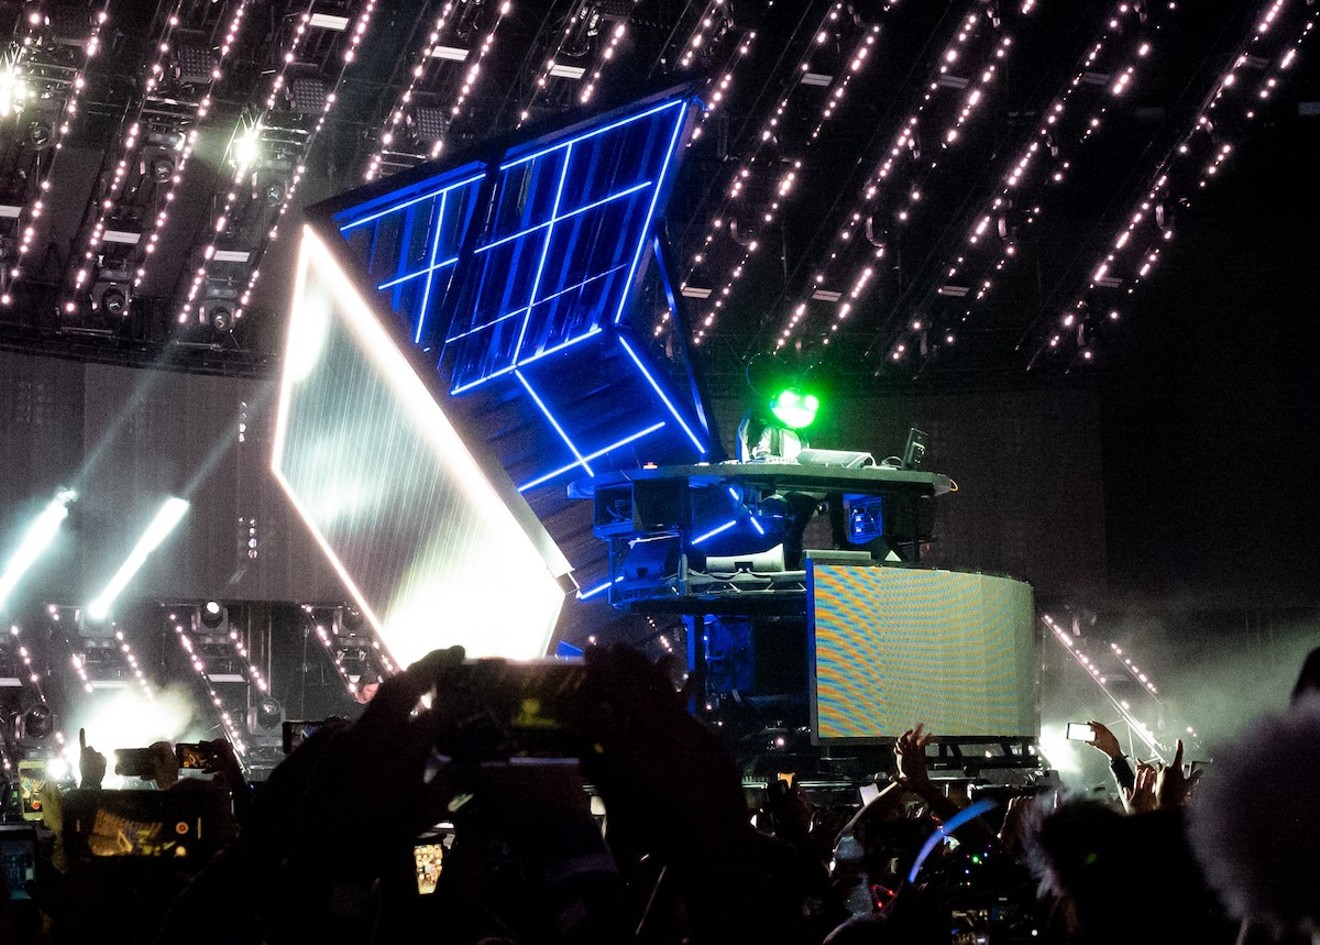 Deadmau5 debuted his latest cube at Ultra last night. View more photos from Ultra Music Festival 2019 Day Two here.